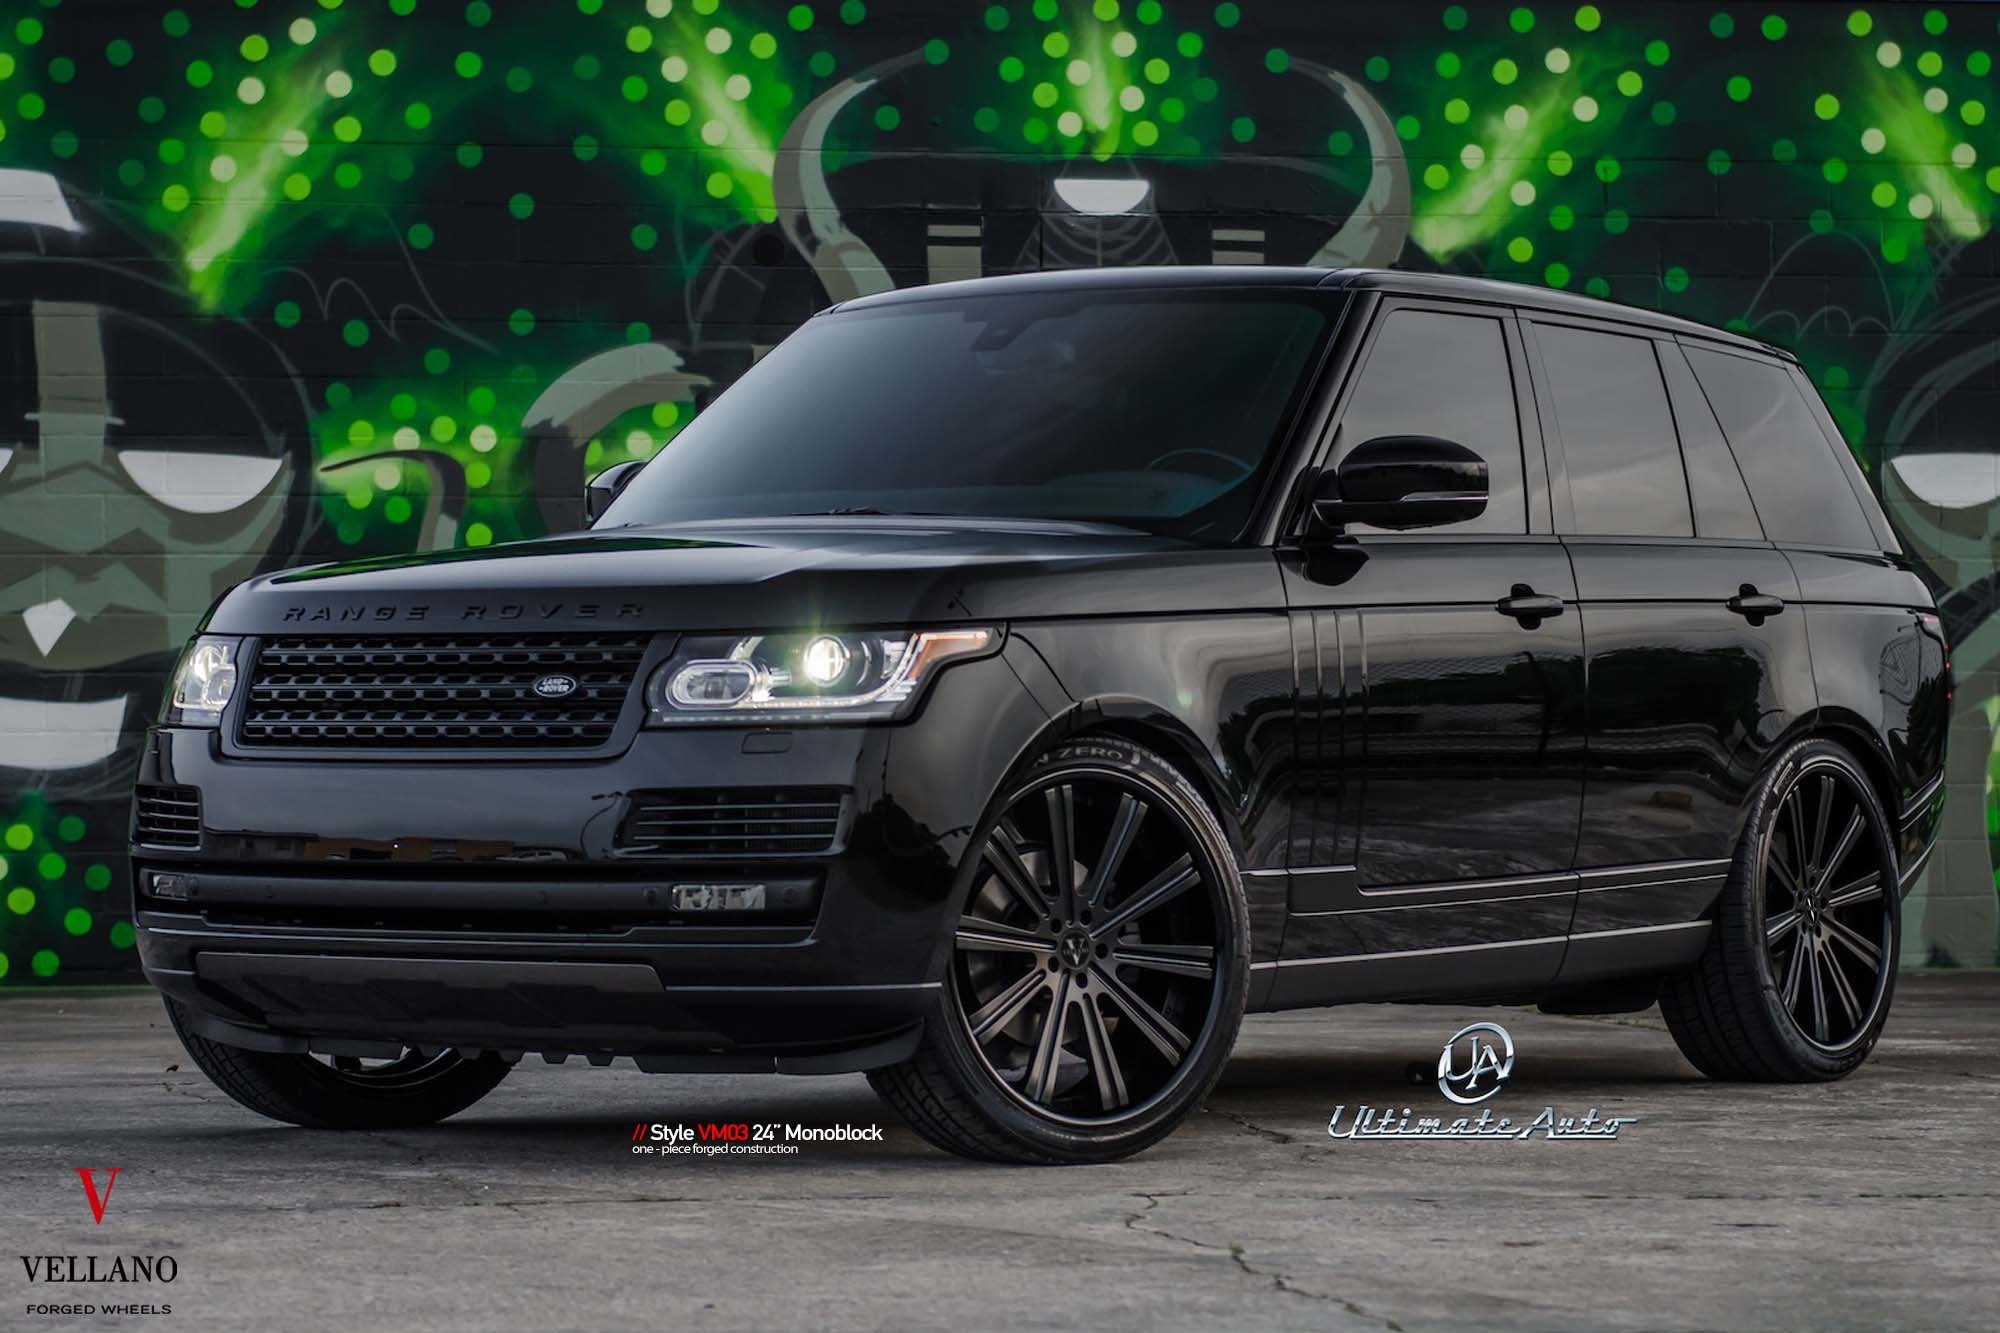 41 HQ Pictures Range Rover Sport Blacked Out : Stormtrooper White Range ...